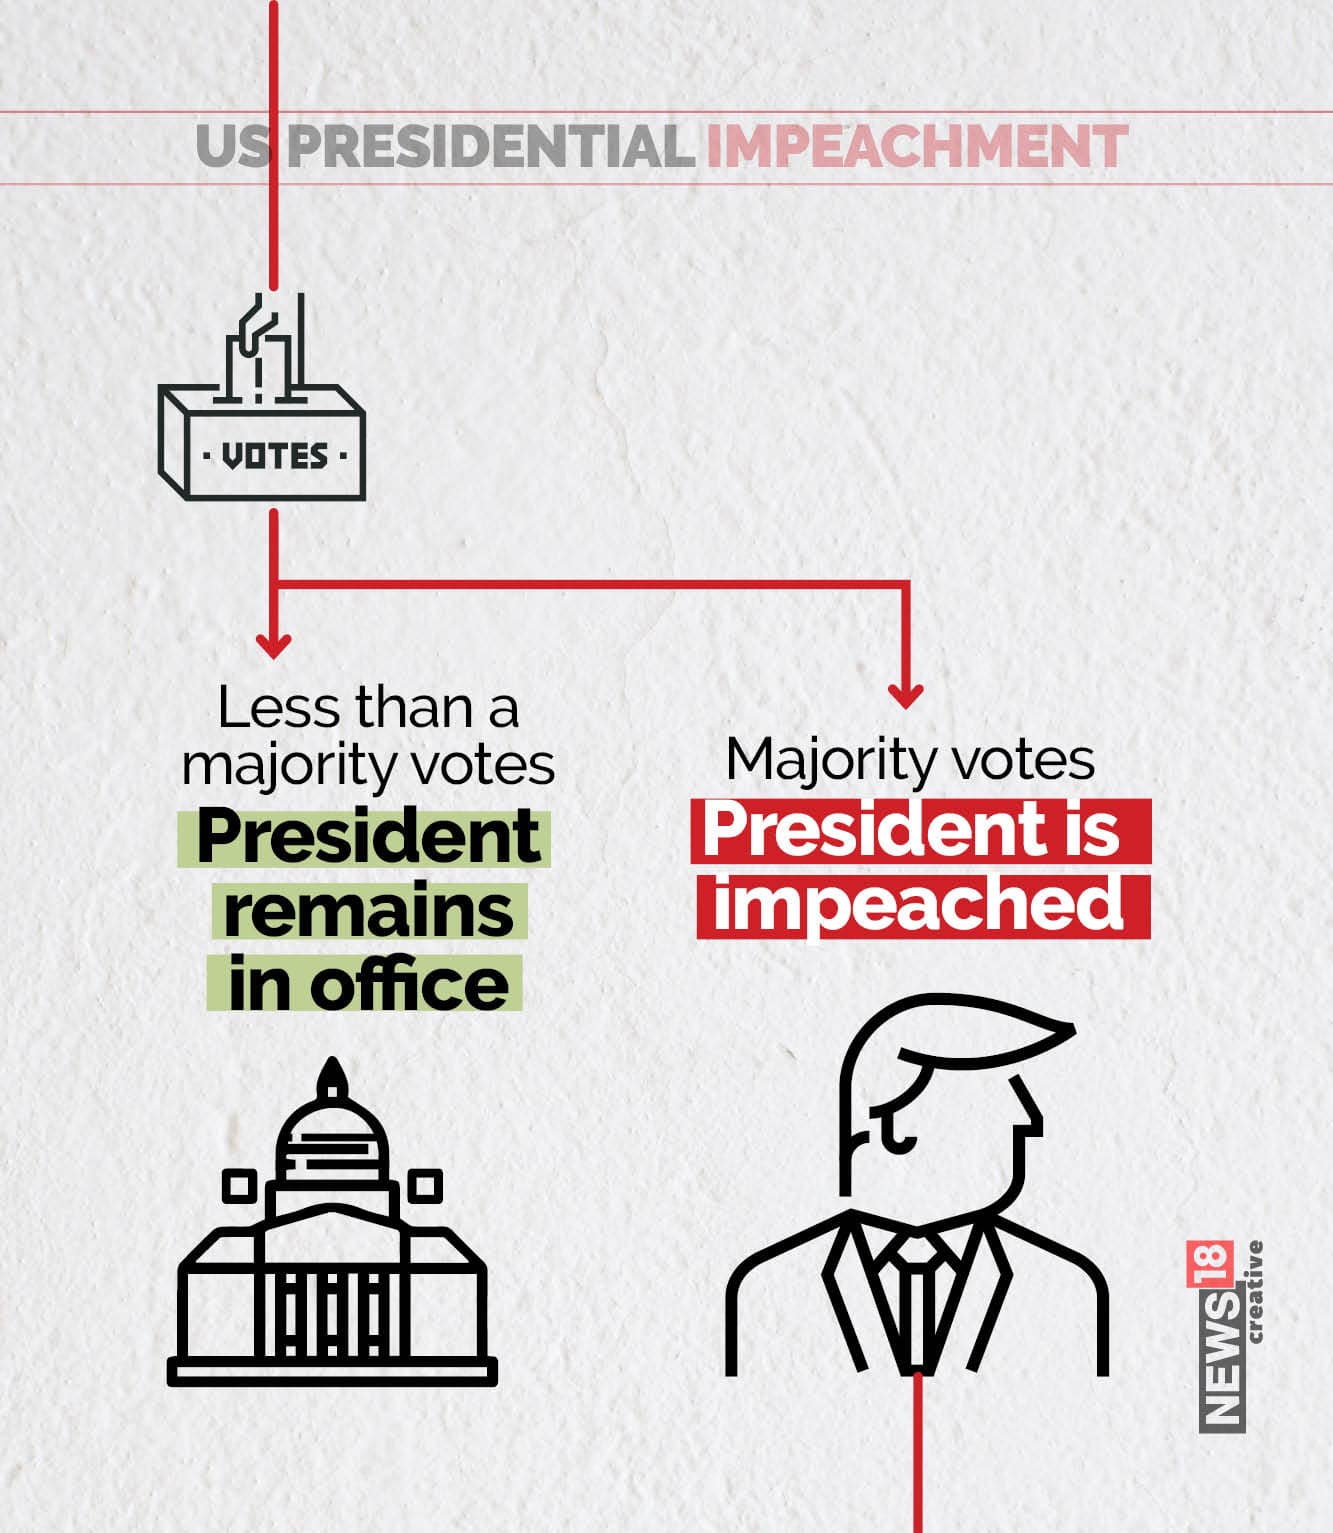 Here S A Look At The Presidential Impeachment Process In United States